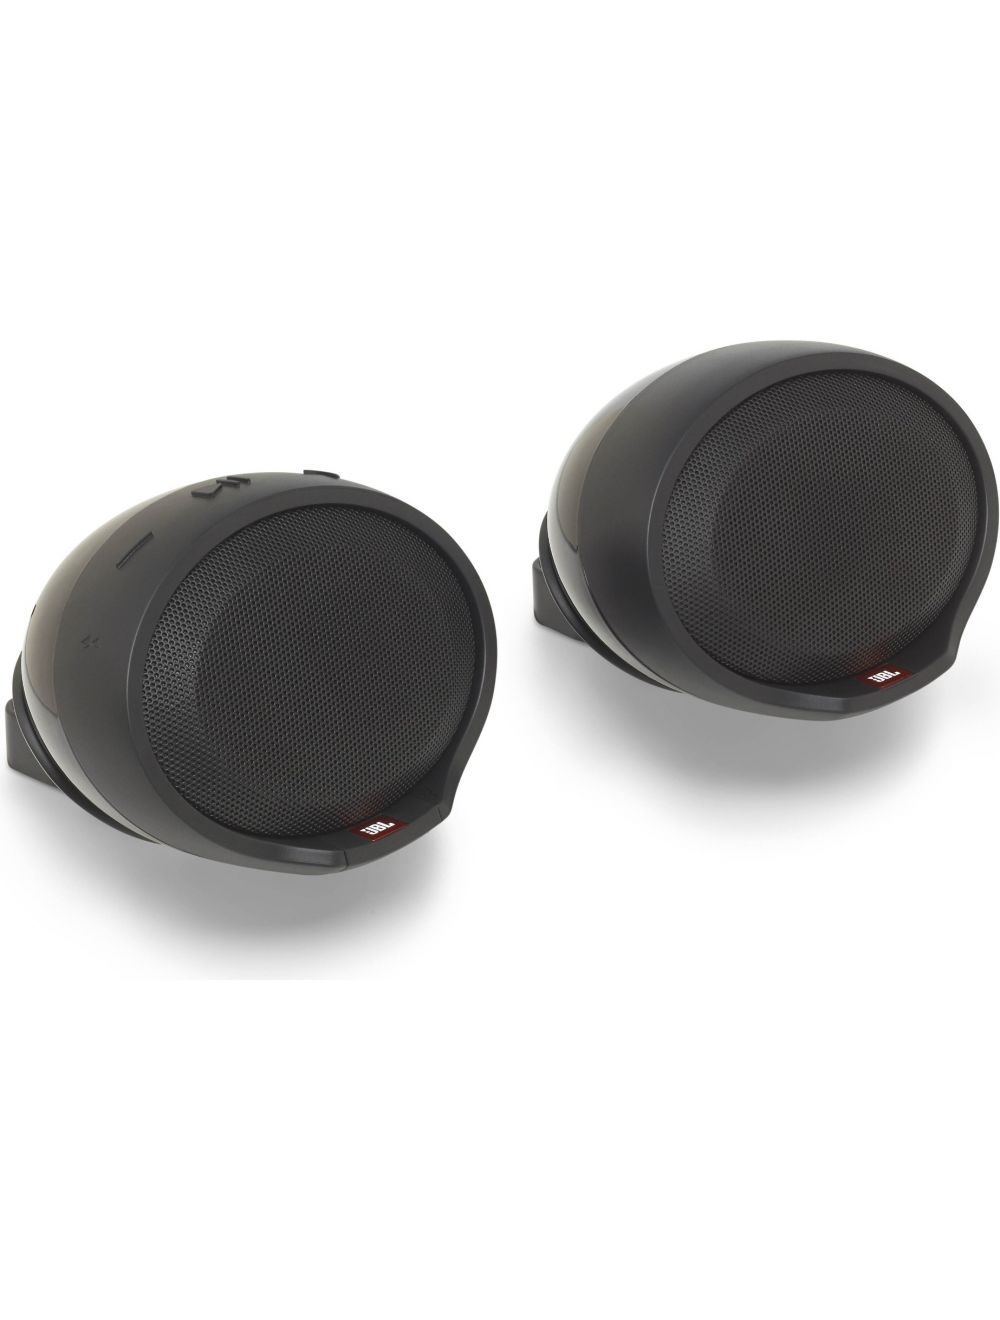 JBL Cruise Handlebar-mount Bluetooth speaker pods for motorcycles and scooters (Black)